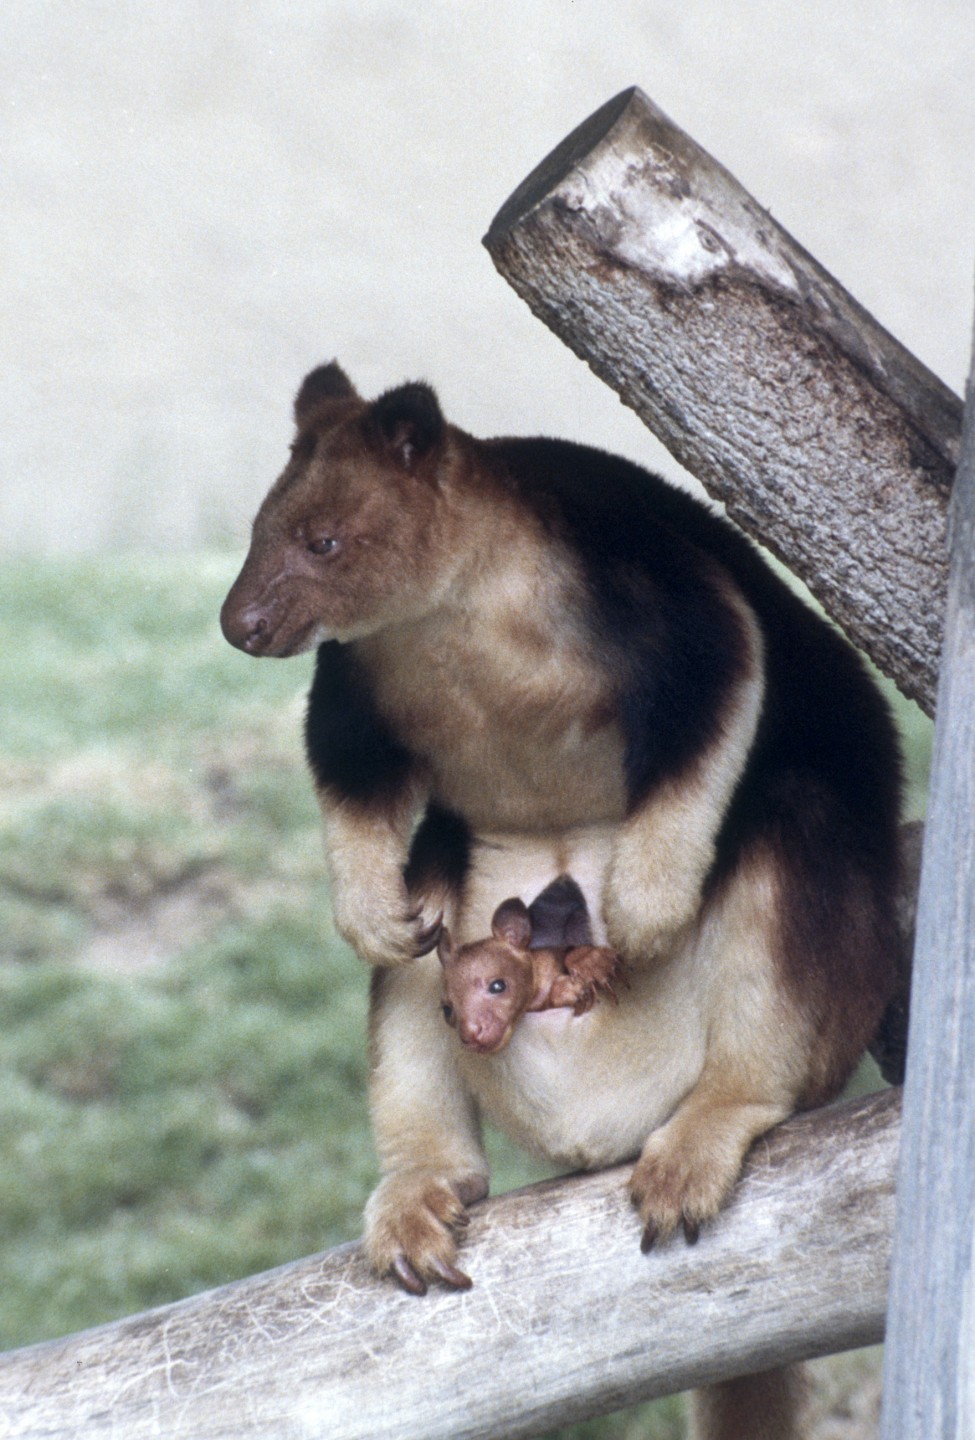 Rare in zoos, the Goodfellow's tree kangaroos at the San Diego Zoo, a species native to New Guinea, wowed visitors and pleased staff with a joey in 1979. This was the first time this species had reproduced at the San Diego Zoo, and the little one poked its head out for the first time on August 6.